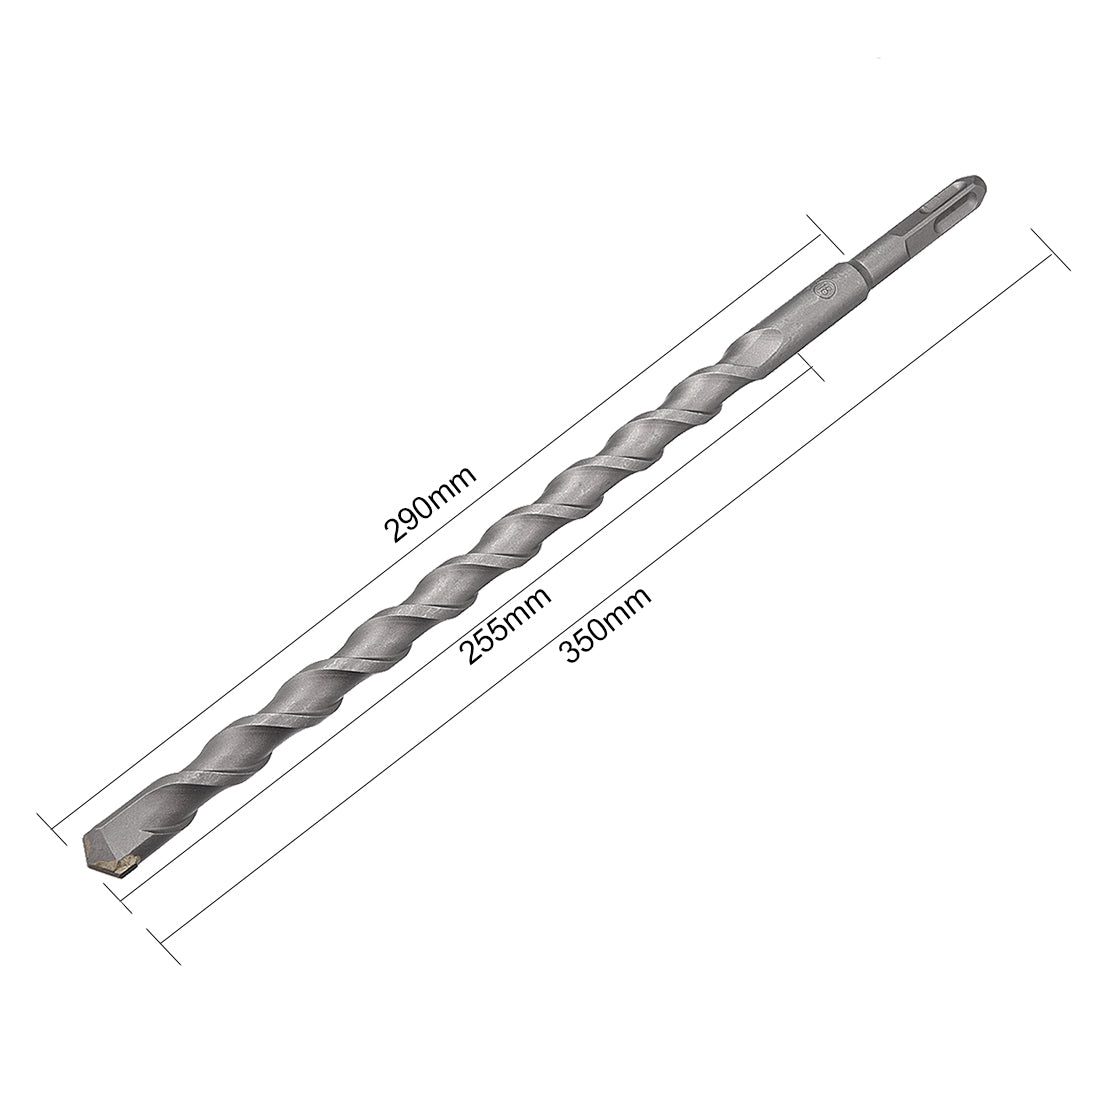 uxcell Uxcell Masonry Drill Bit 18mmx350mm 9mm Square Shank for Impact Drill